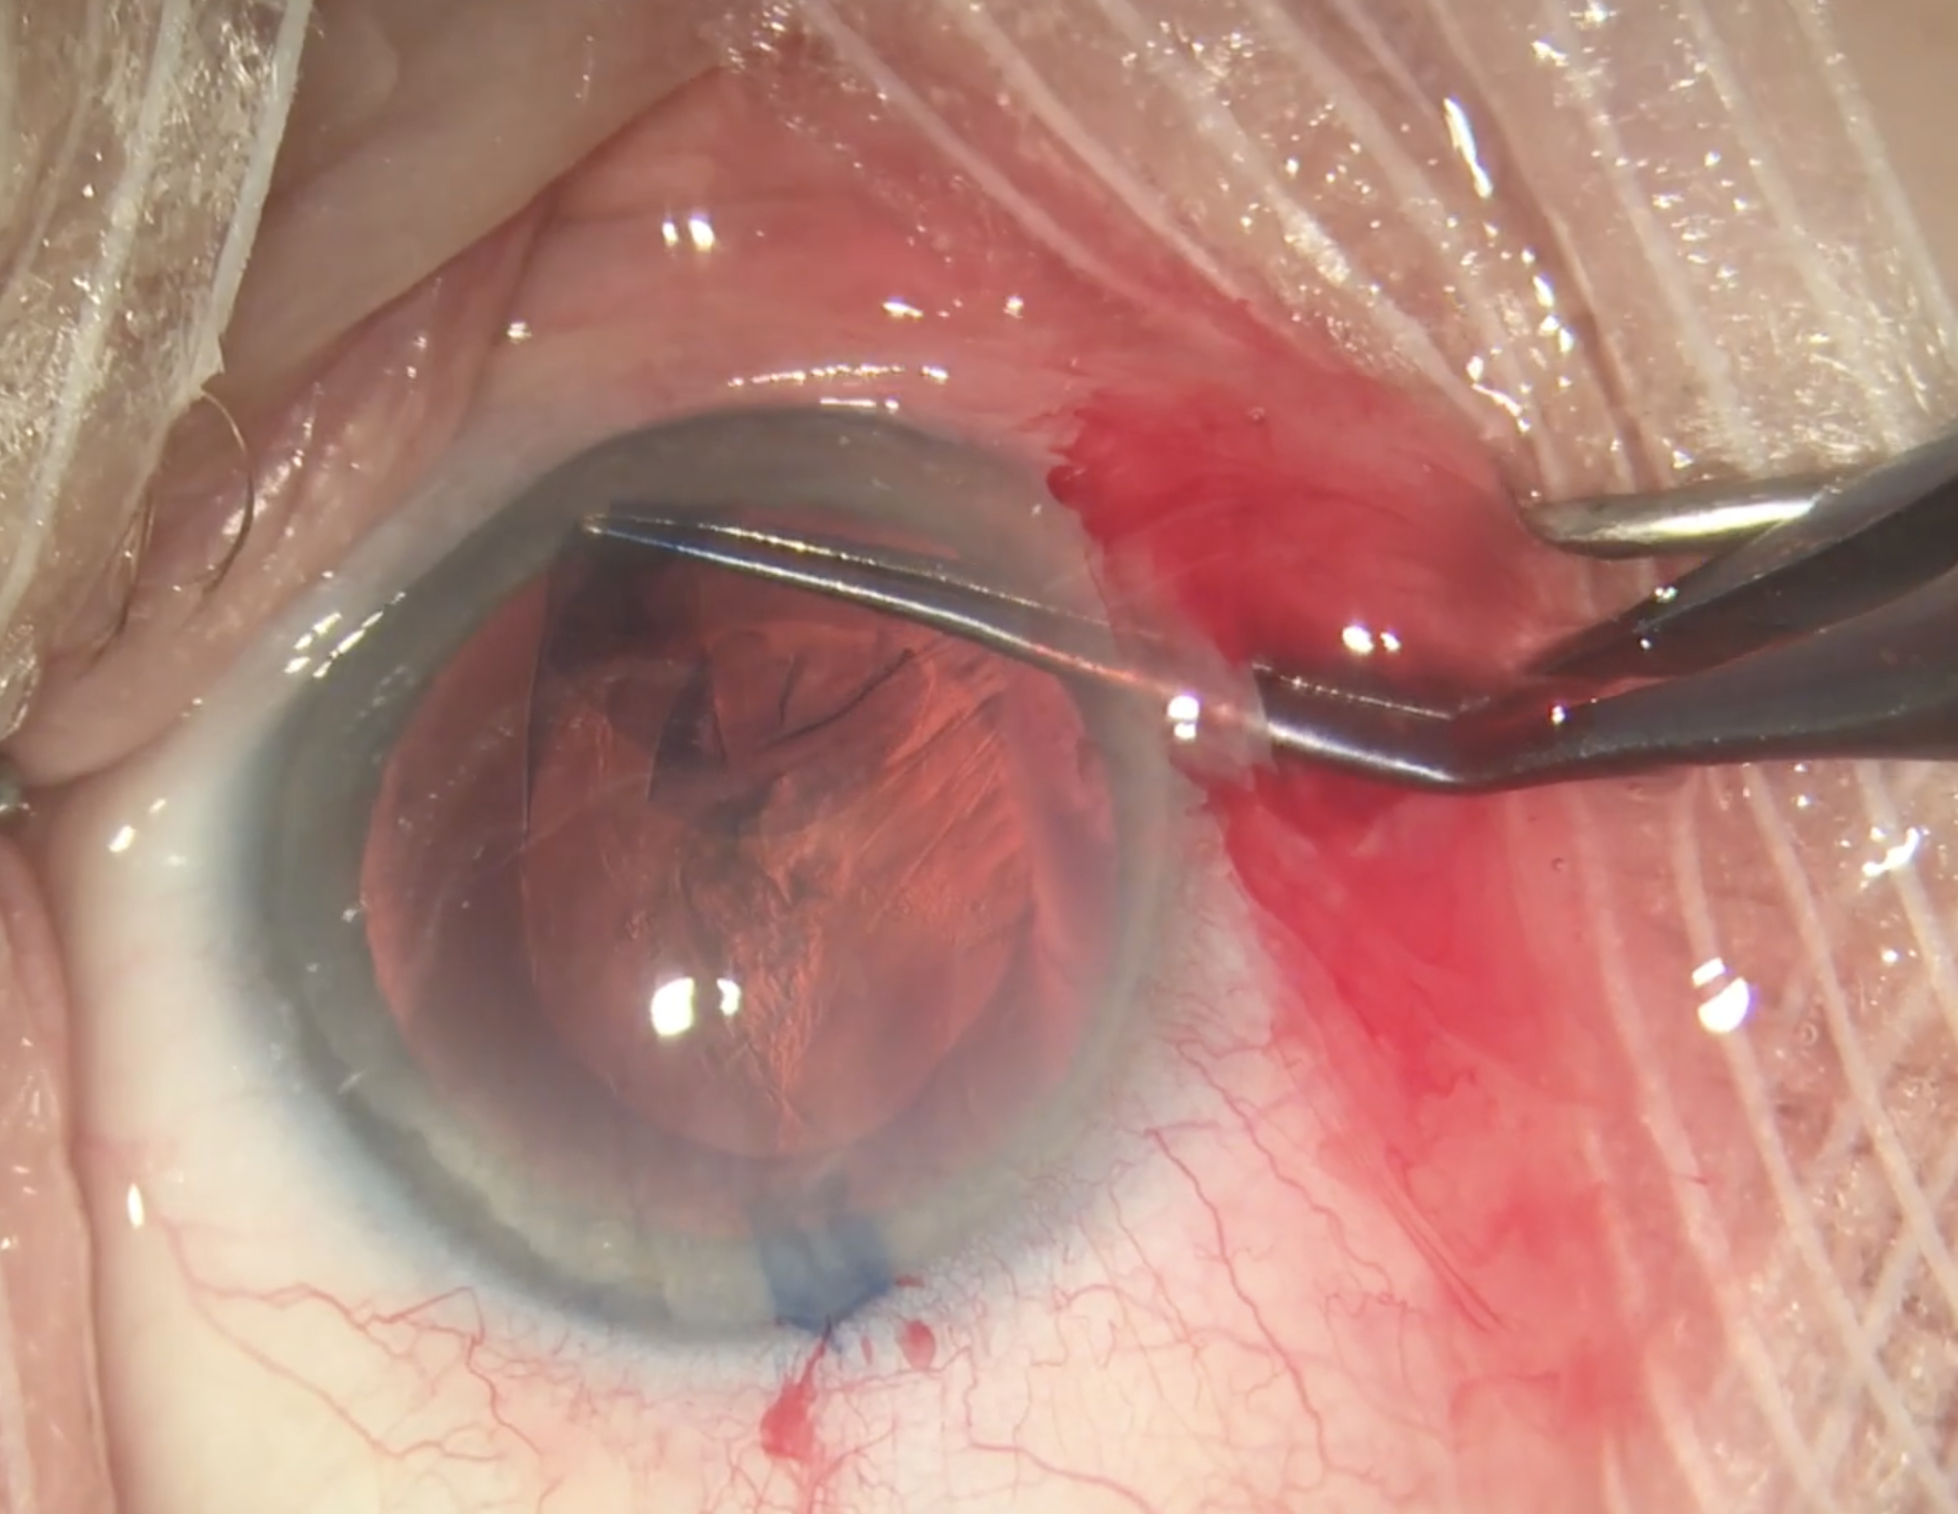 Today’s highly predictable and safe cataract procedures are laying the groundwork for an eventual shift to same-day bilateral surgery.